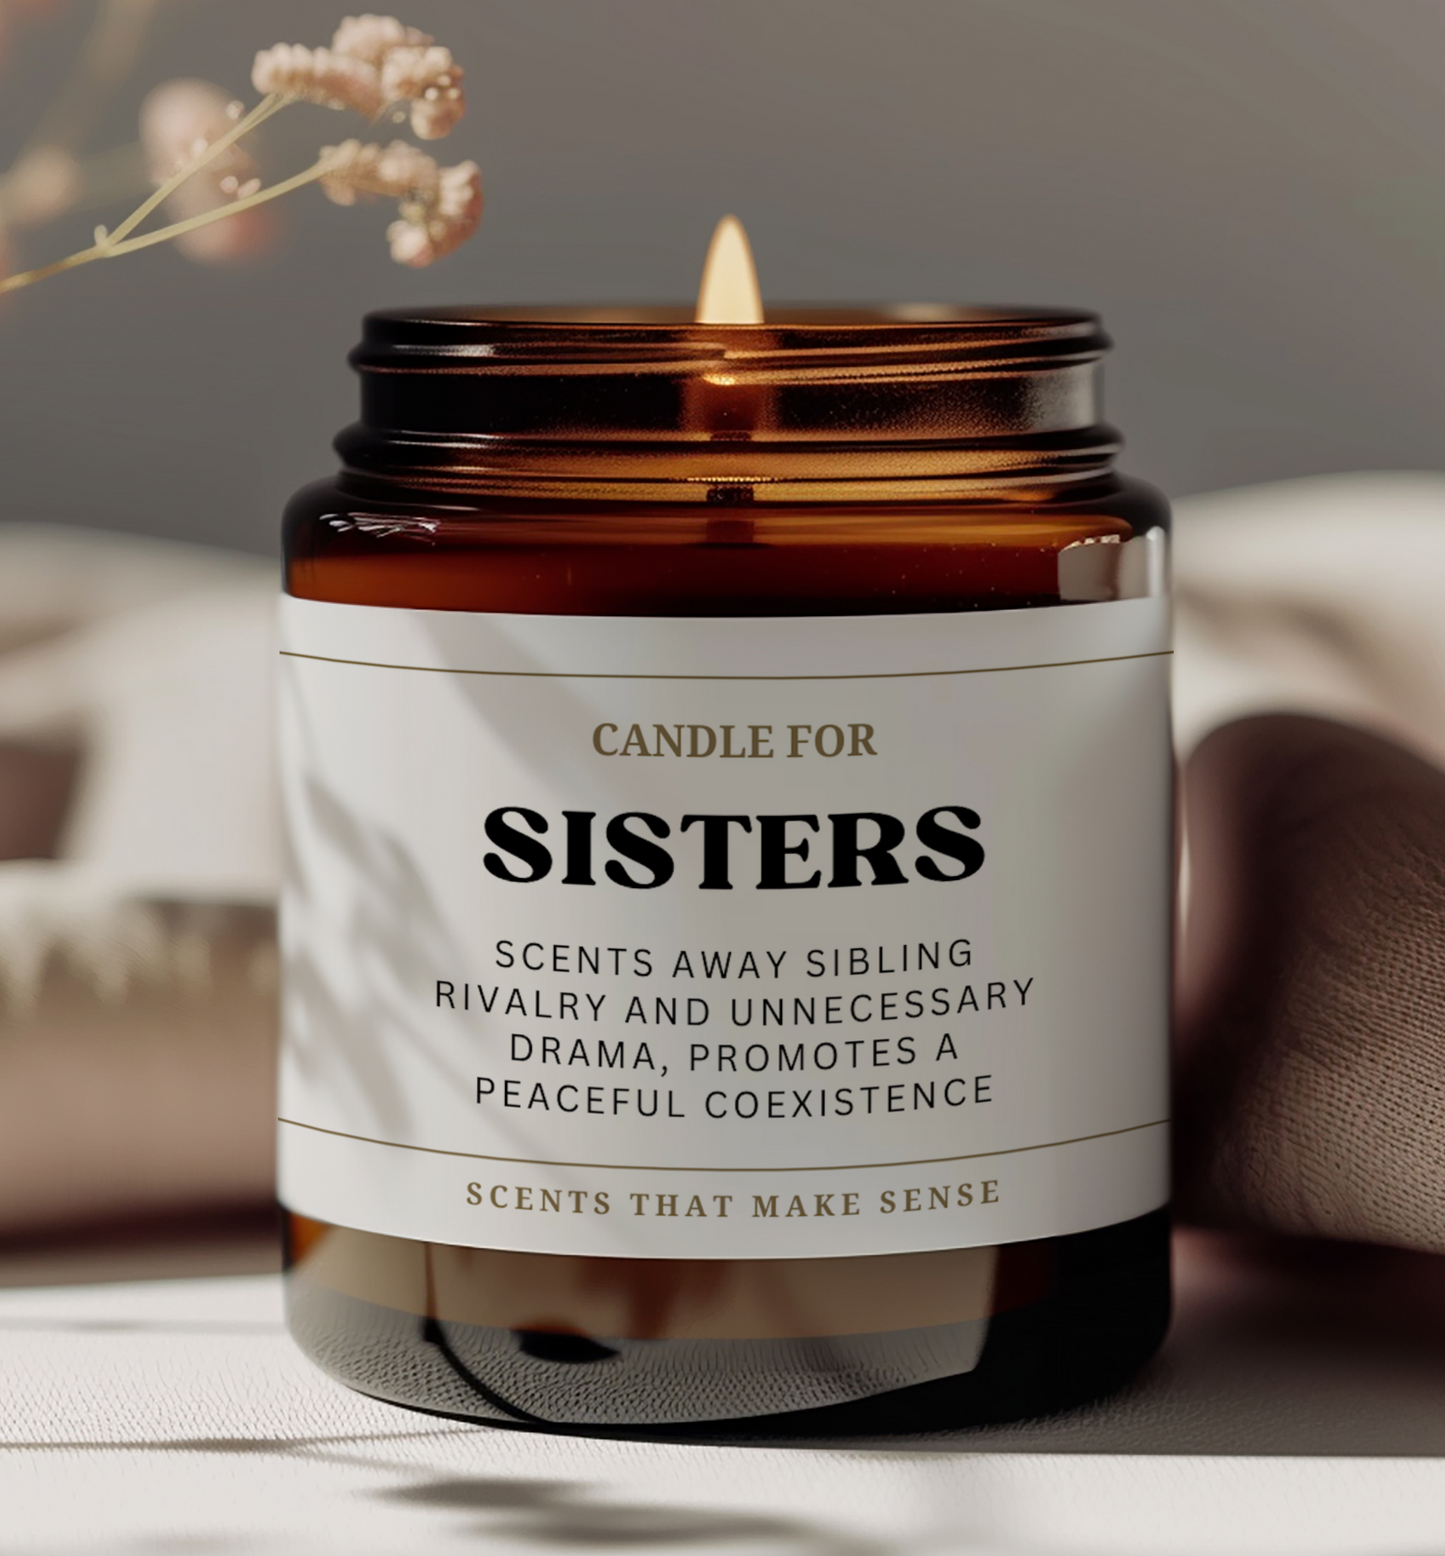 sister birthday gift funny candle gift the text on  the candle label reads candle for sisters scents away sibling rivalry and unnecessary drama promotes a peaceful coexistence